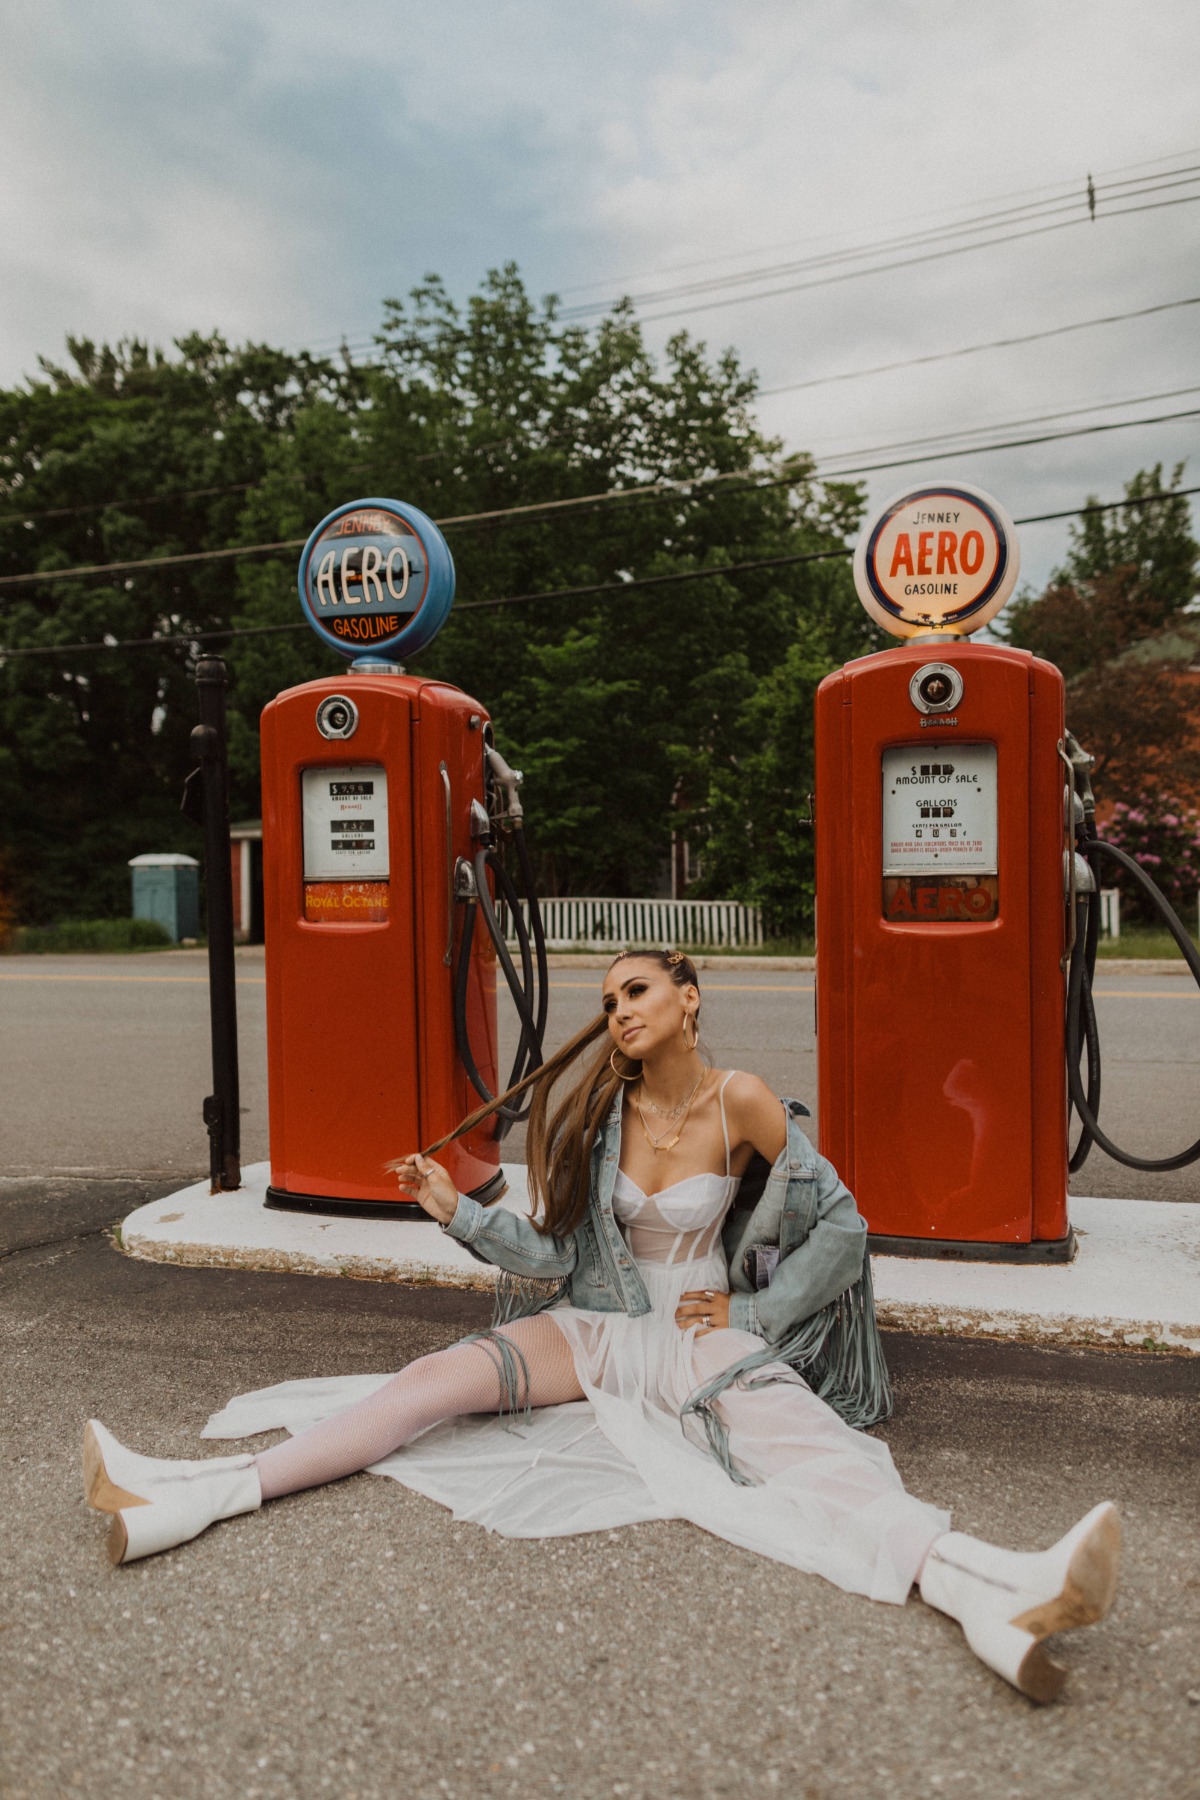 old-gas-station-photoshoot-styled-new-ha